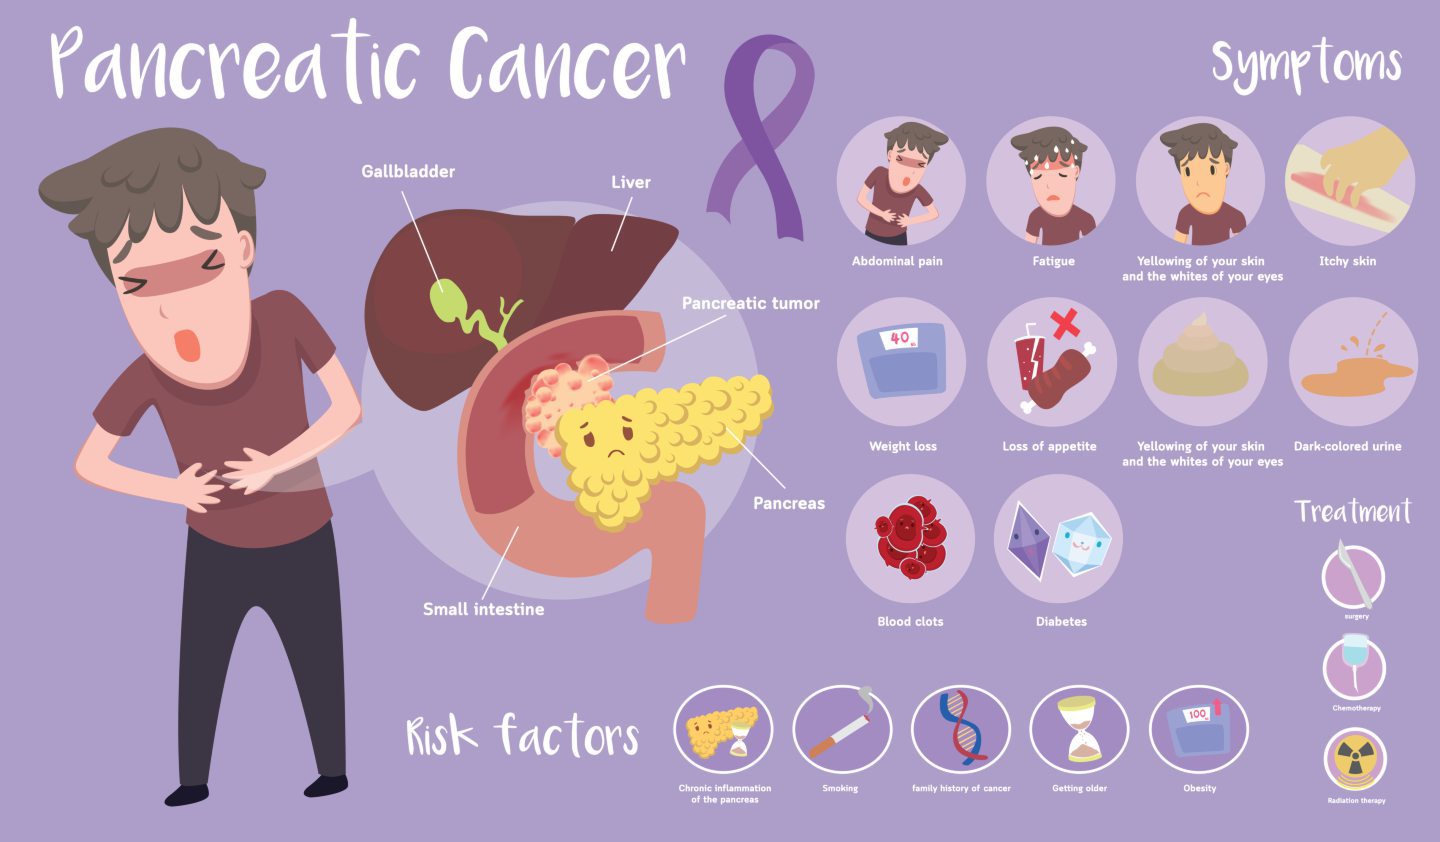 Typical symptoms of pancreatic cancer.